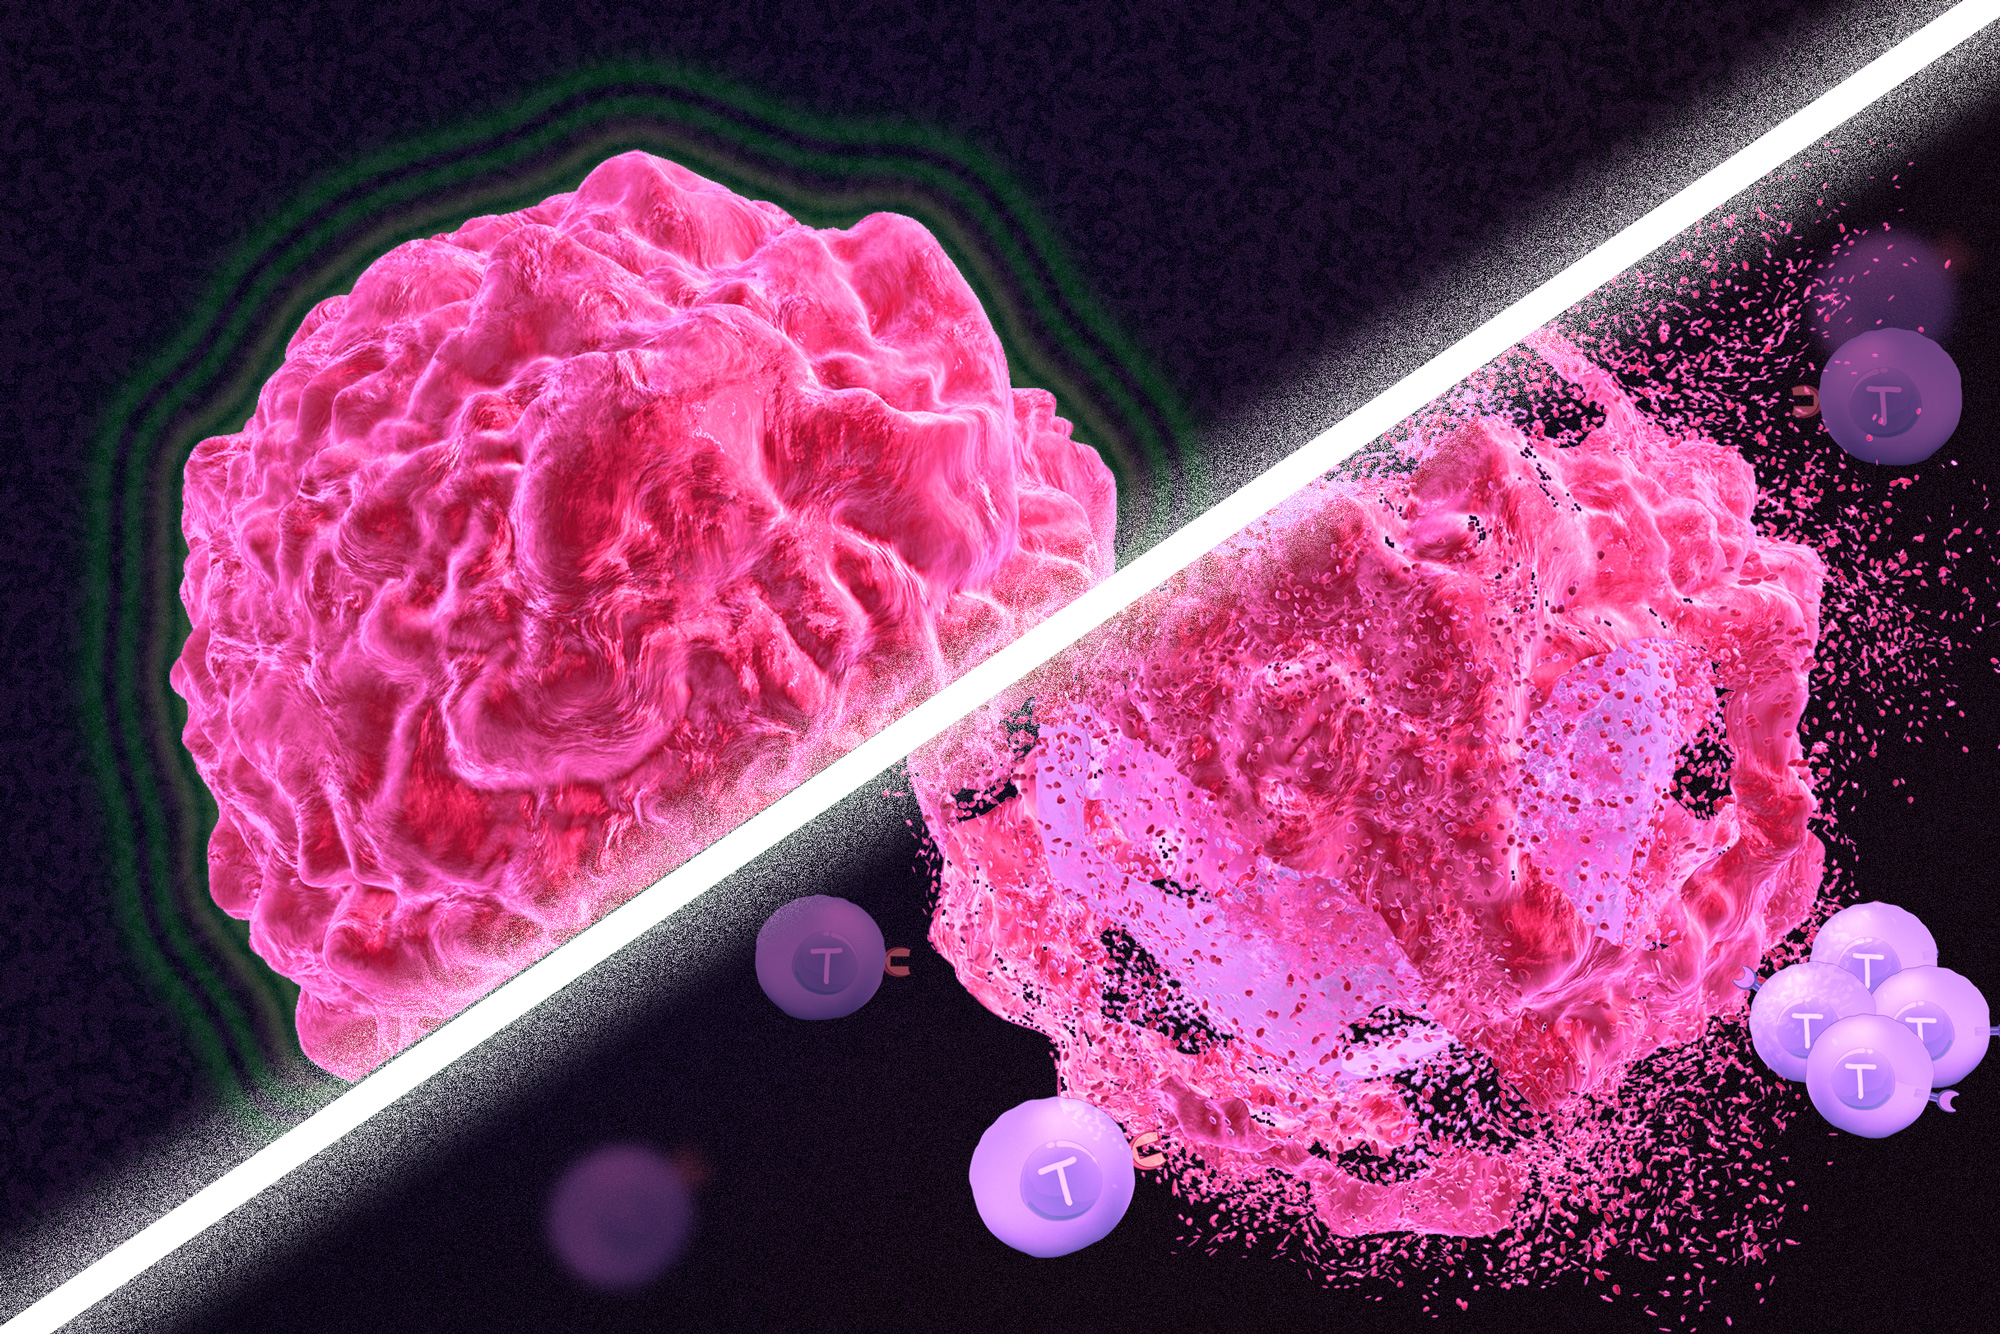 New cancer treatment may reawaken the immune system